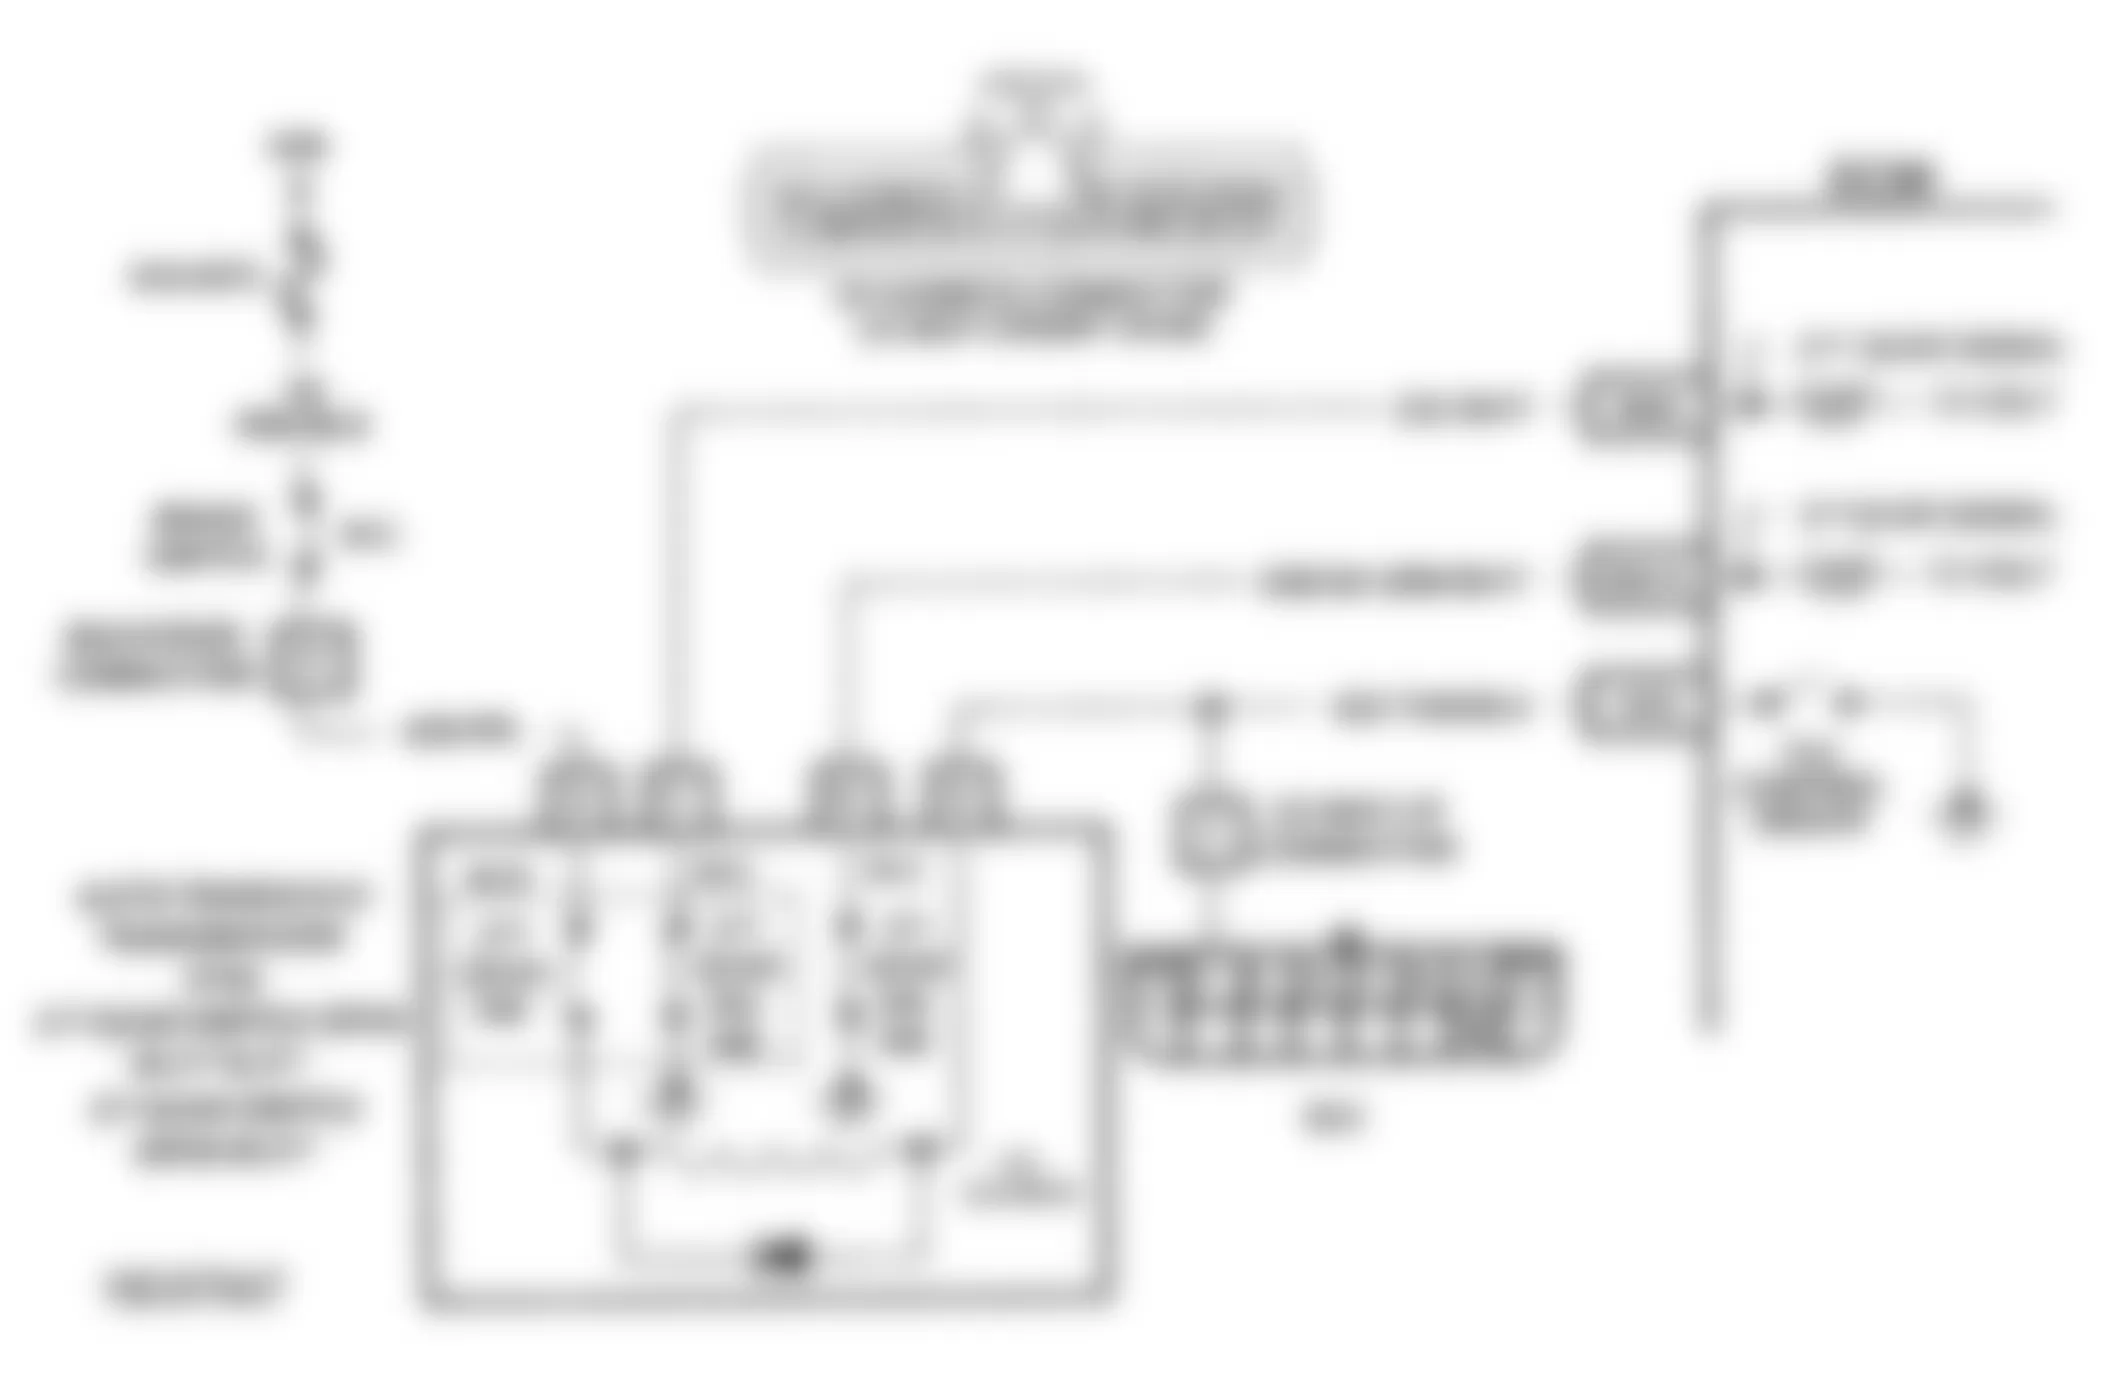 Buick Regal Limited 1992 - Component Locations -  Code 62, Schematic, Gear Switch Error, J Body